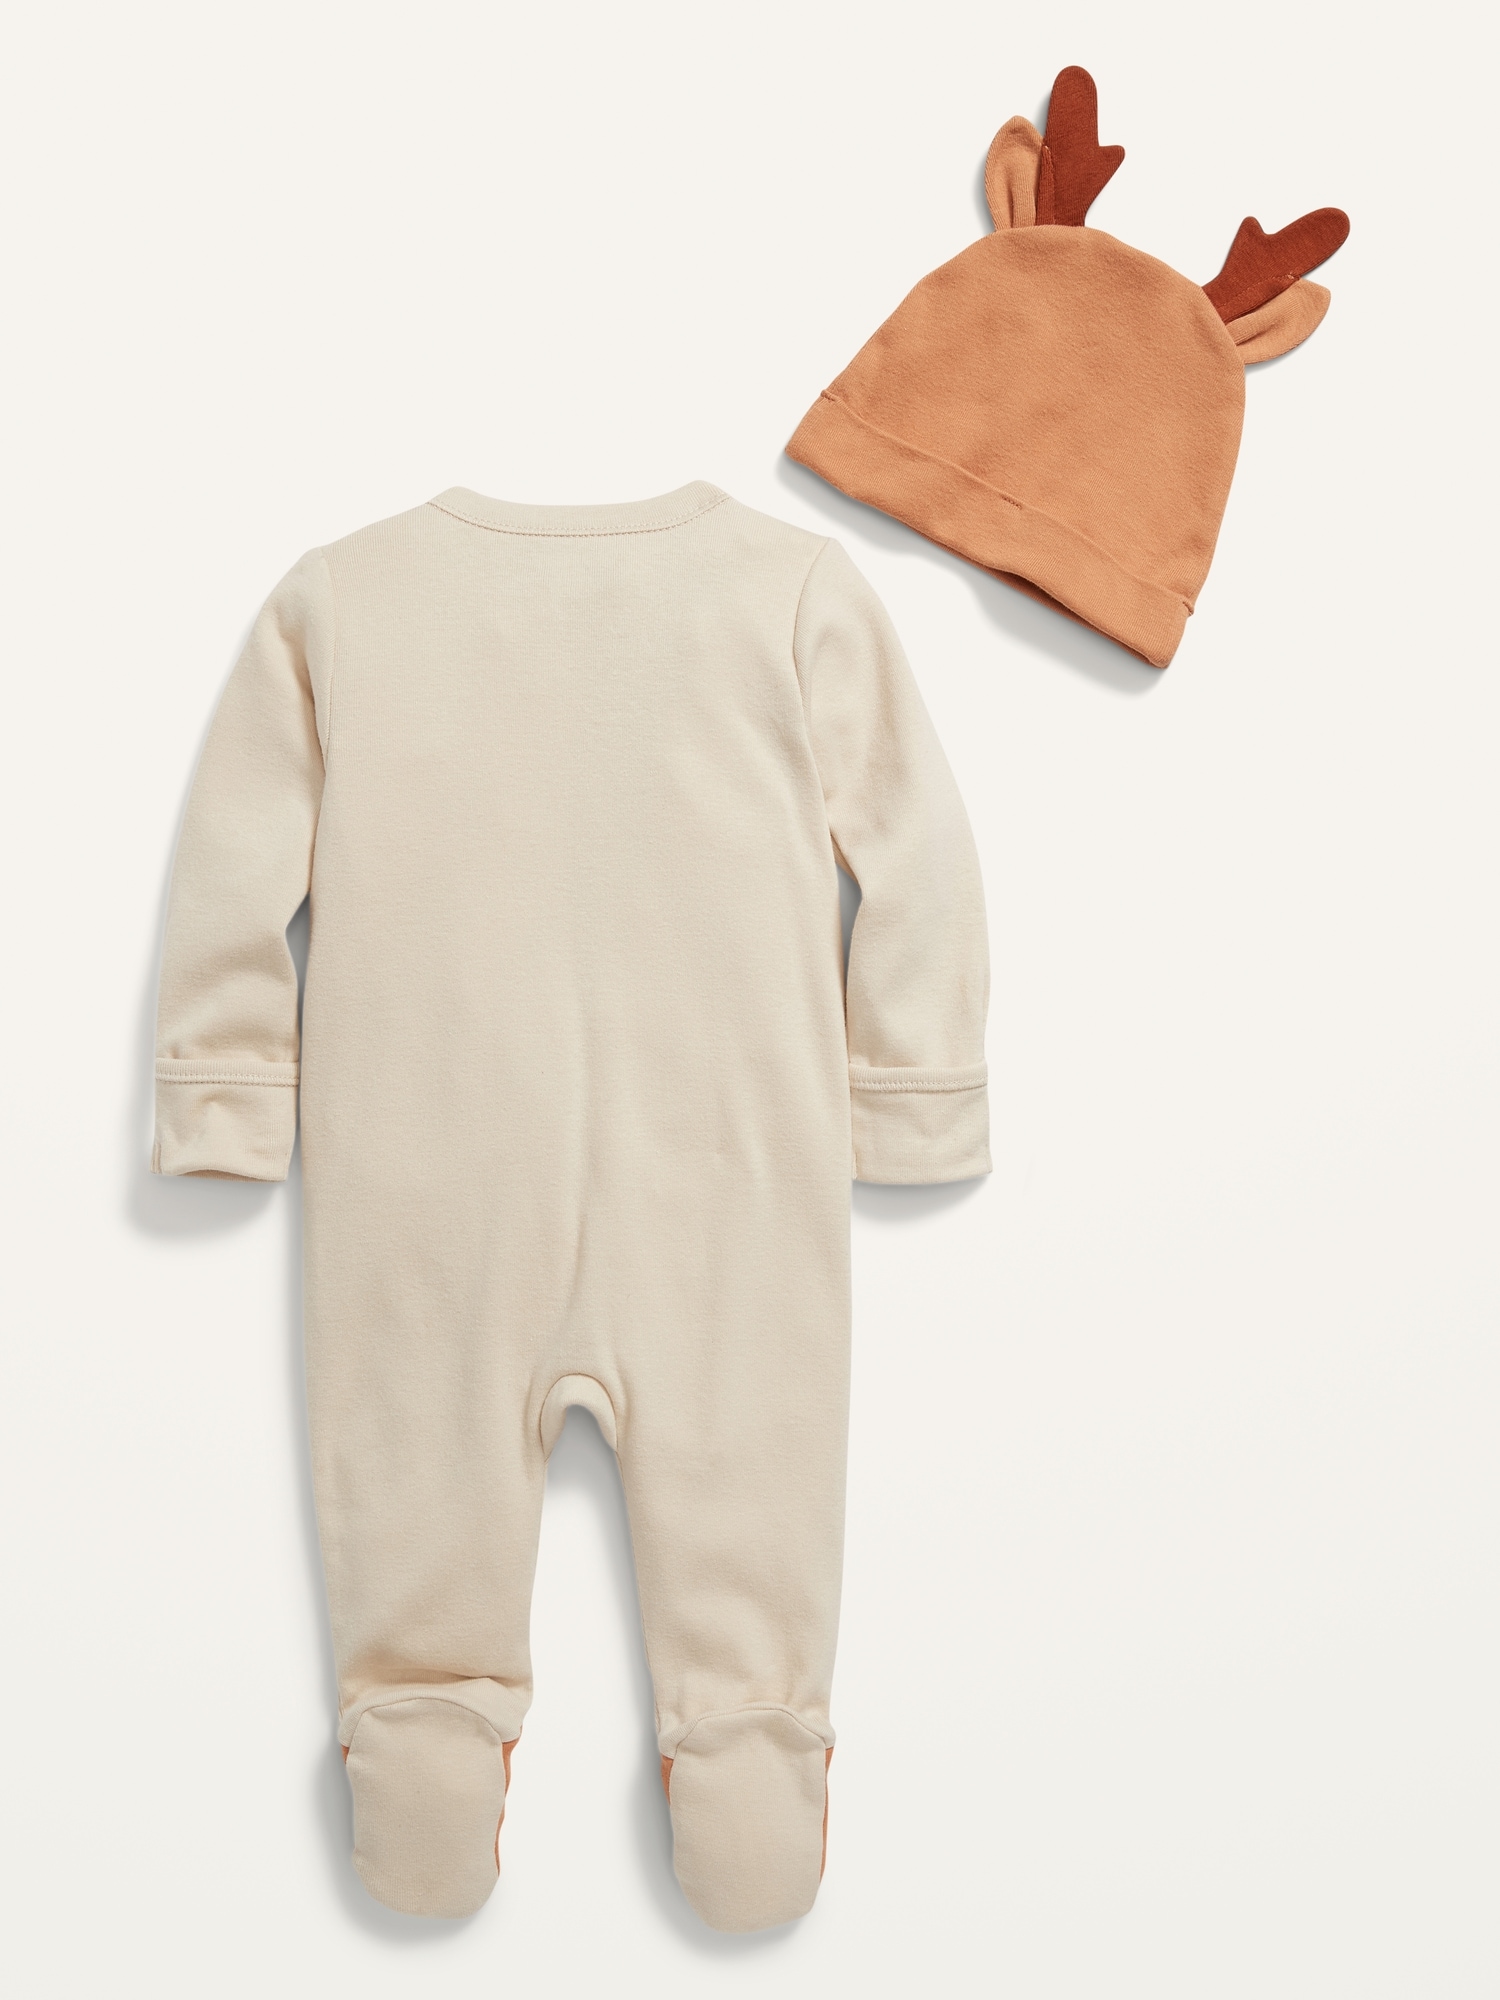 Unisex 2-Piece Sleep & Play Beanie and Footed One-Piece Set for Baby ...